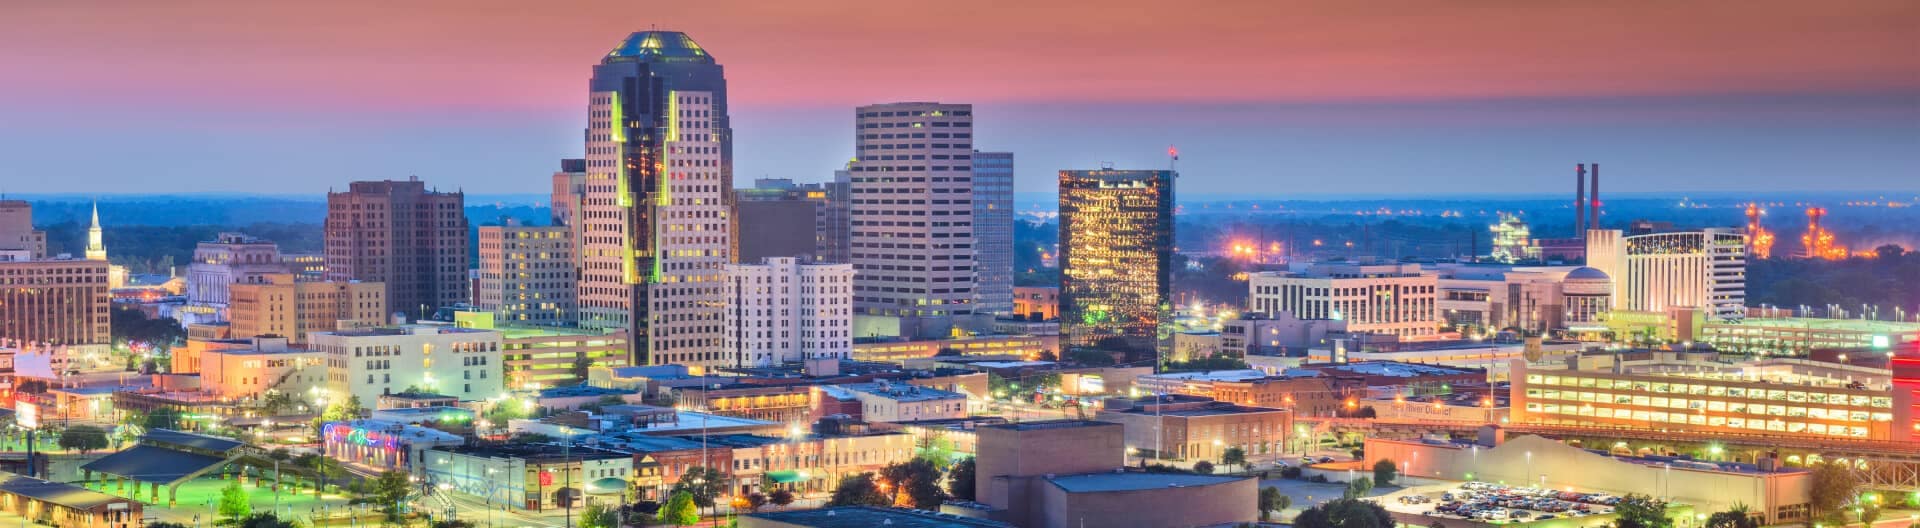 Downtown Bossier City view